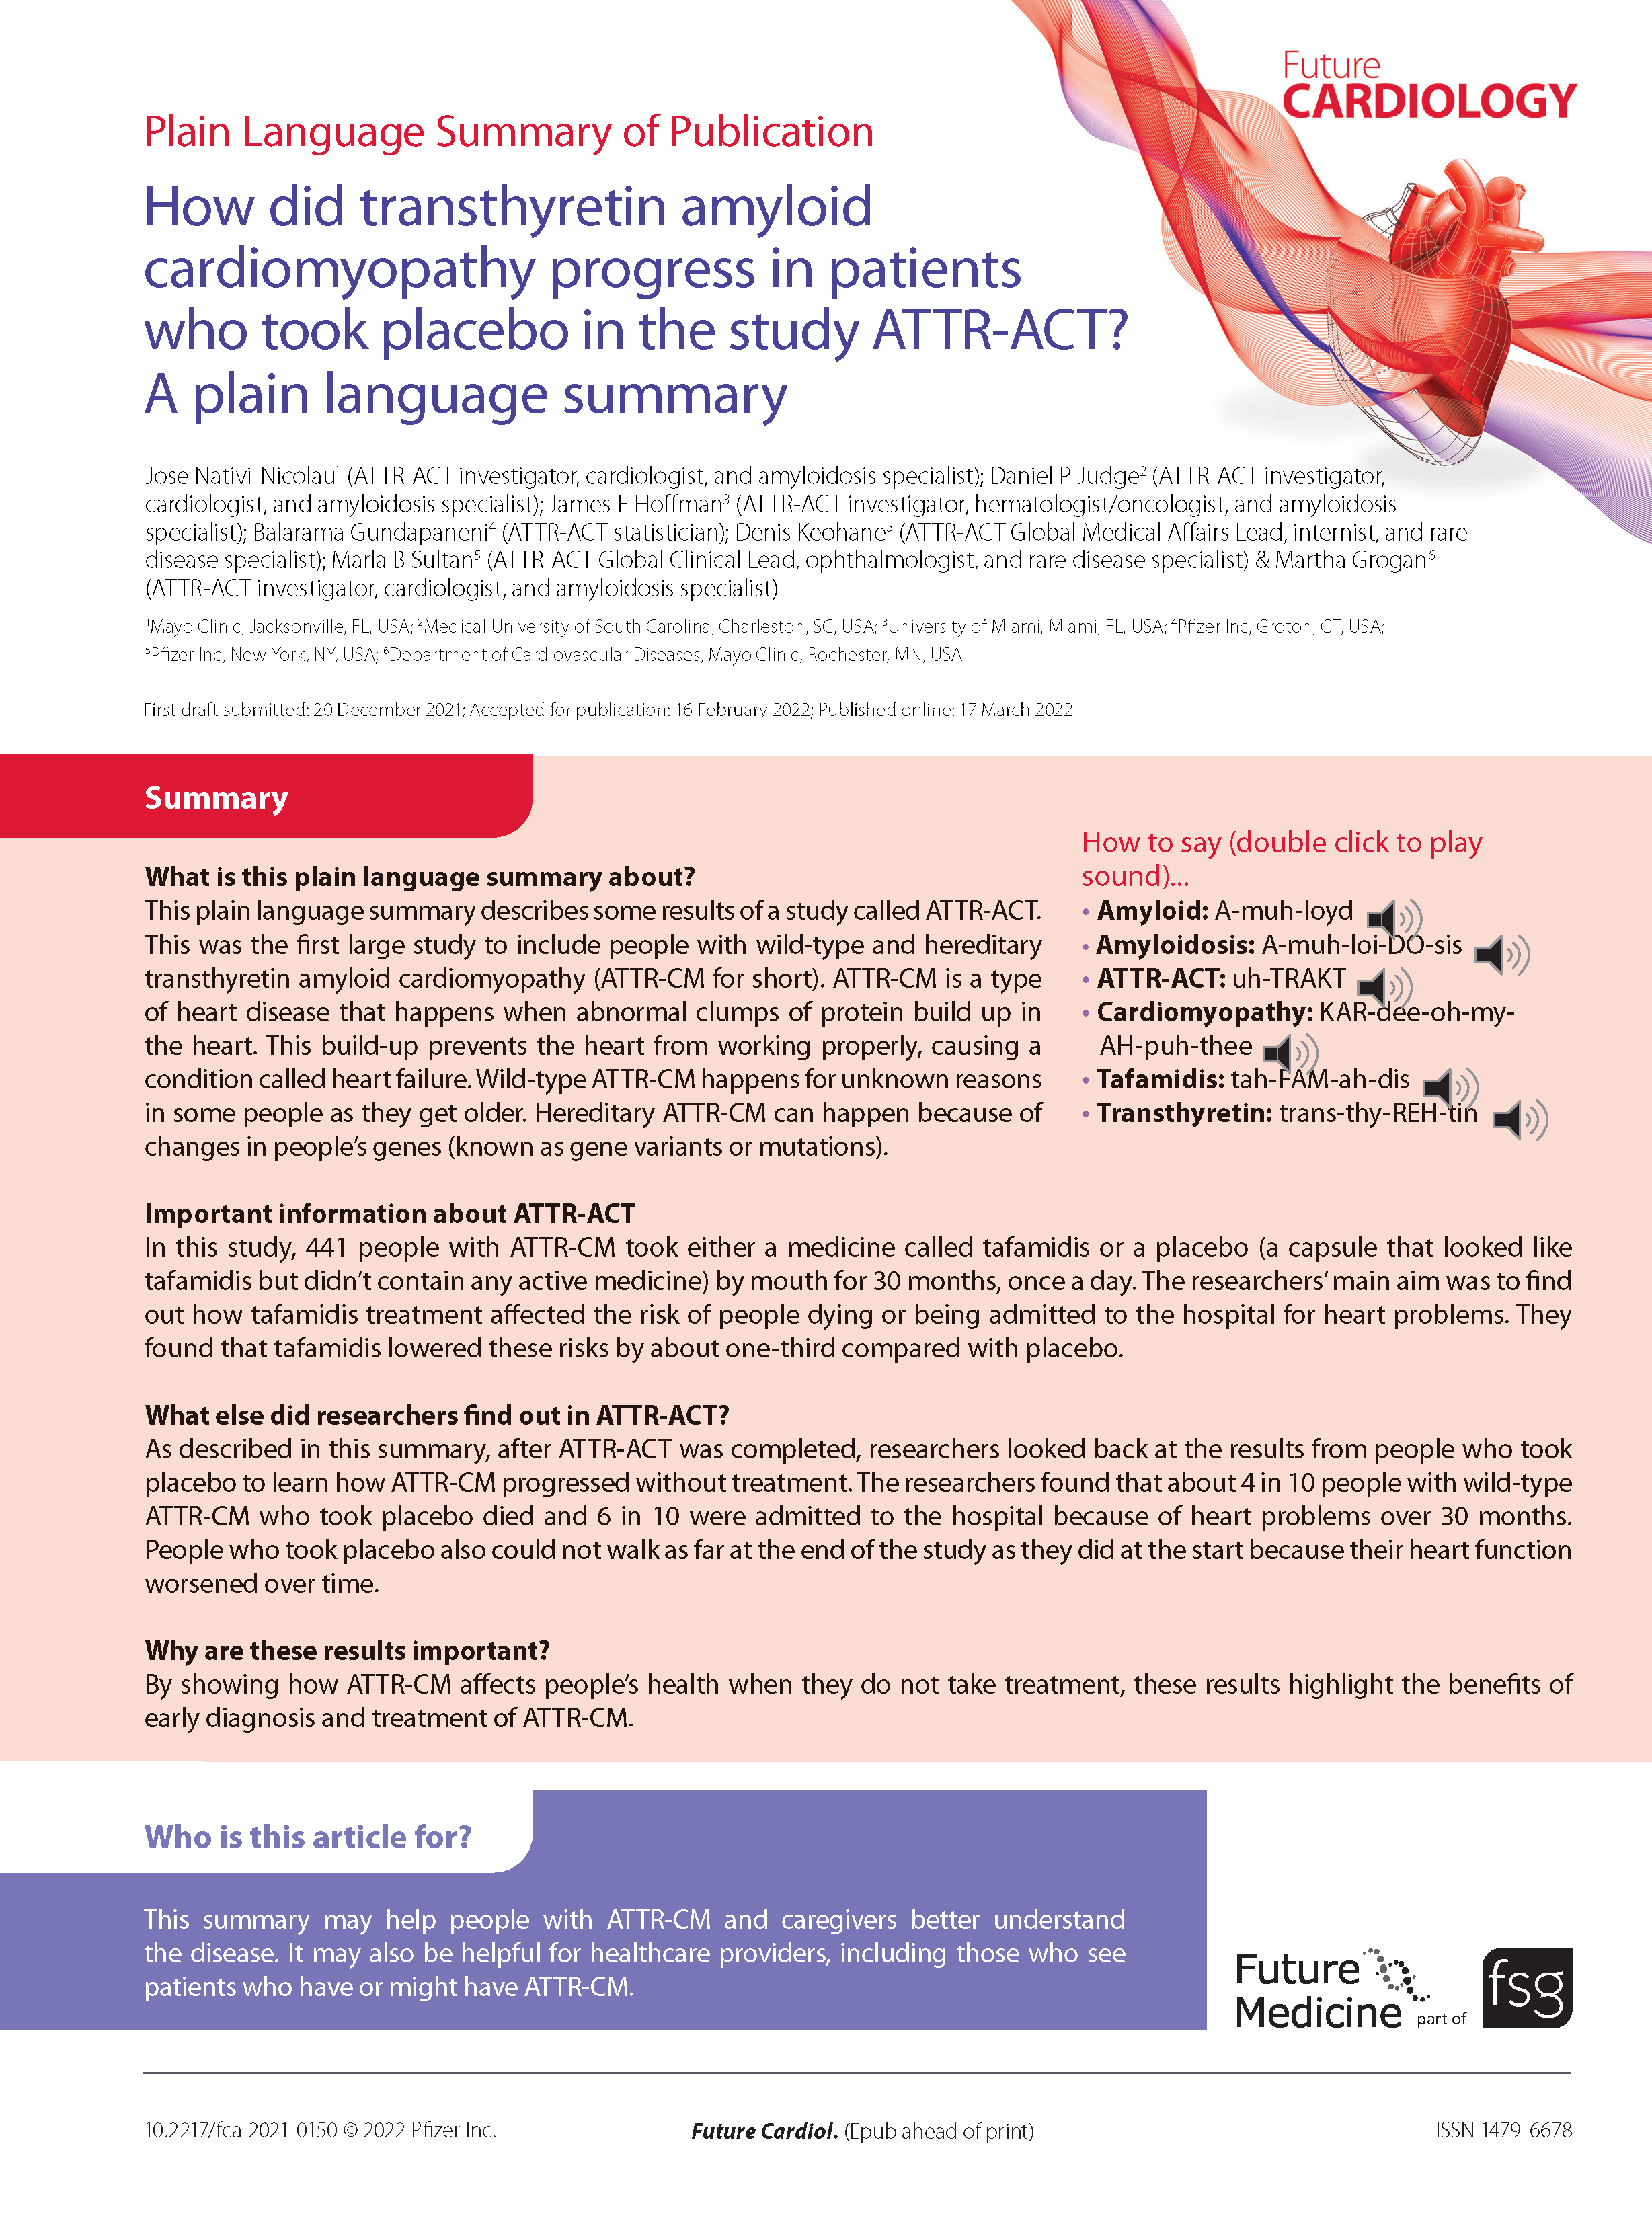 How did transthyretin amyloid cardiomyopathy progress in patients who took placebo in the study ATTR-ACT? A plain language summary